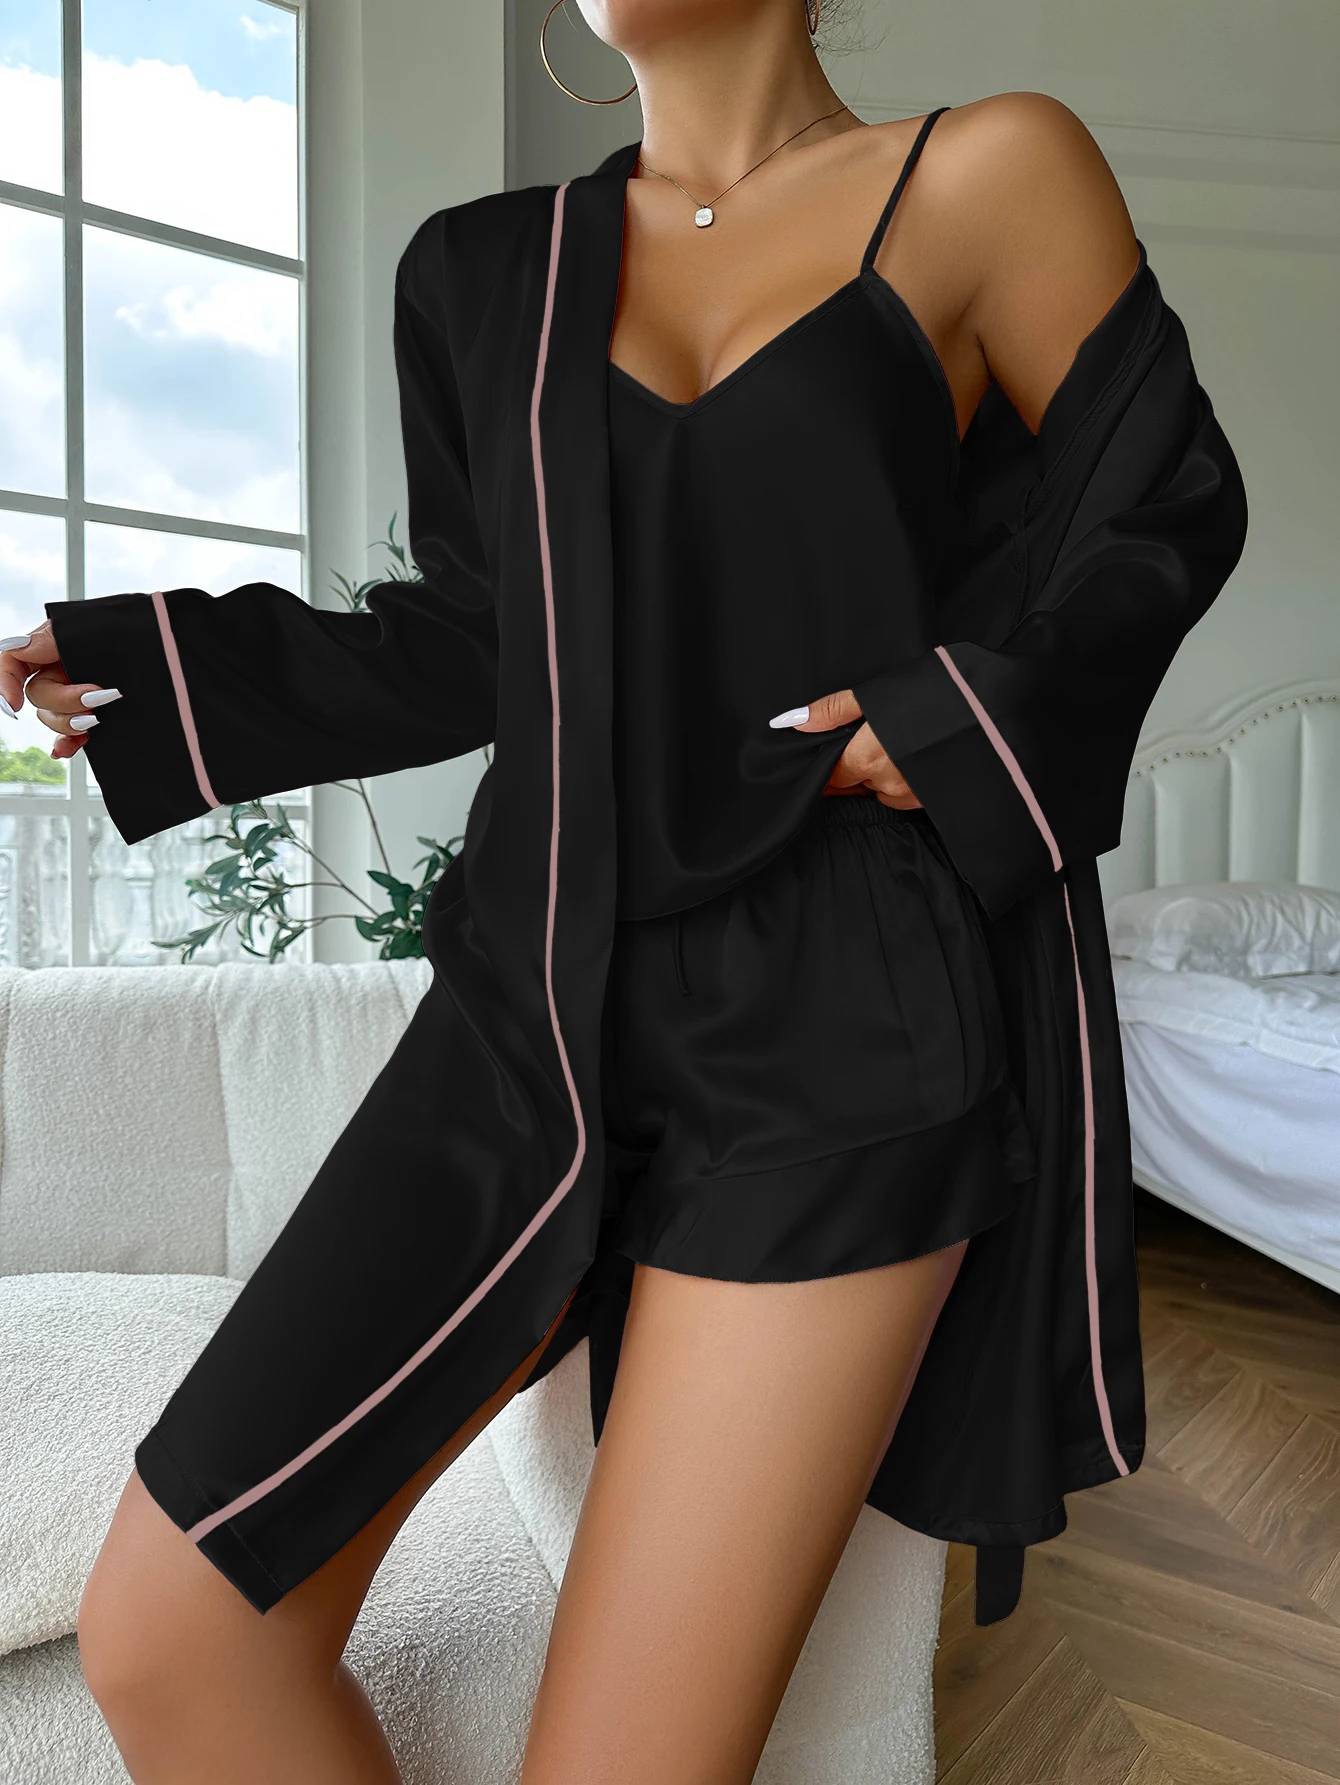 Simple Satin Pajama Set Long Sleeve Belted Robe V Neck Cami Top And Shorts Women's Sleepwear